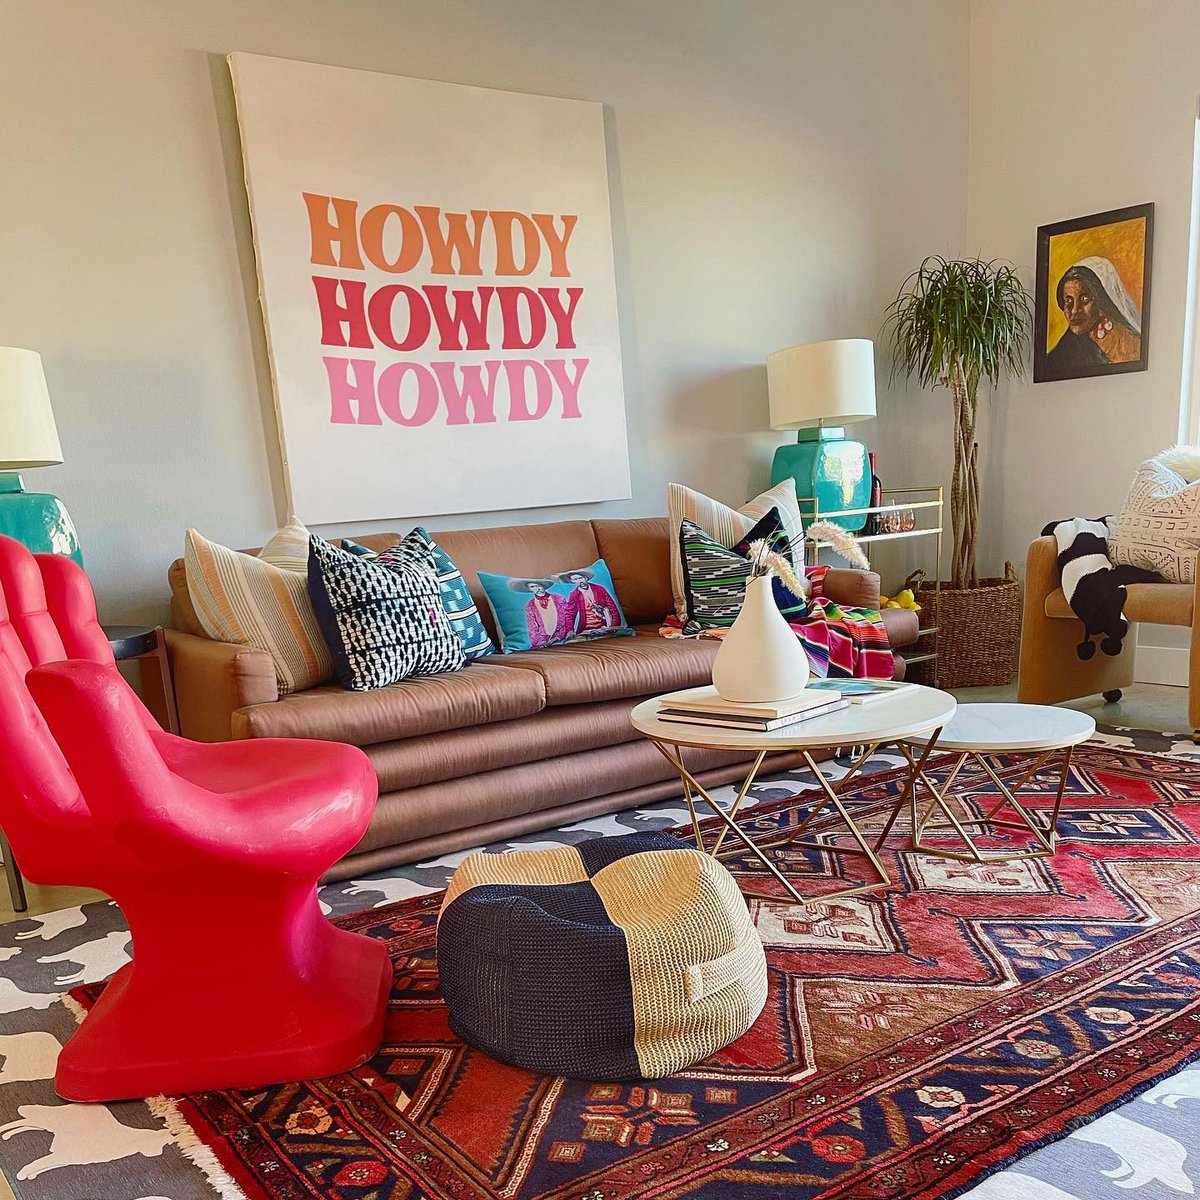 Howdy, weekend! 🥰 Photo from howdyhousebryan Featuring 'Howdy' tapestry by socoart